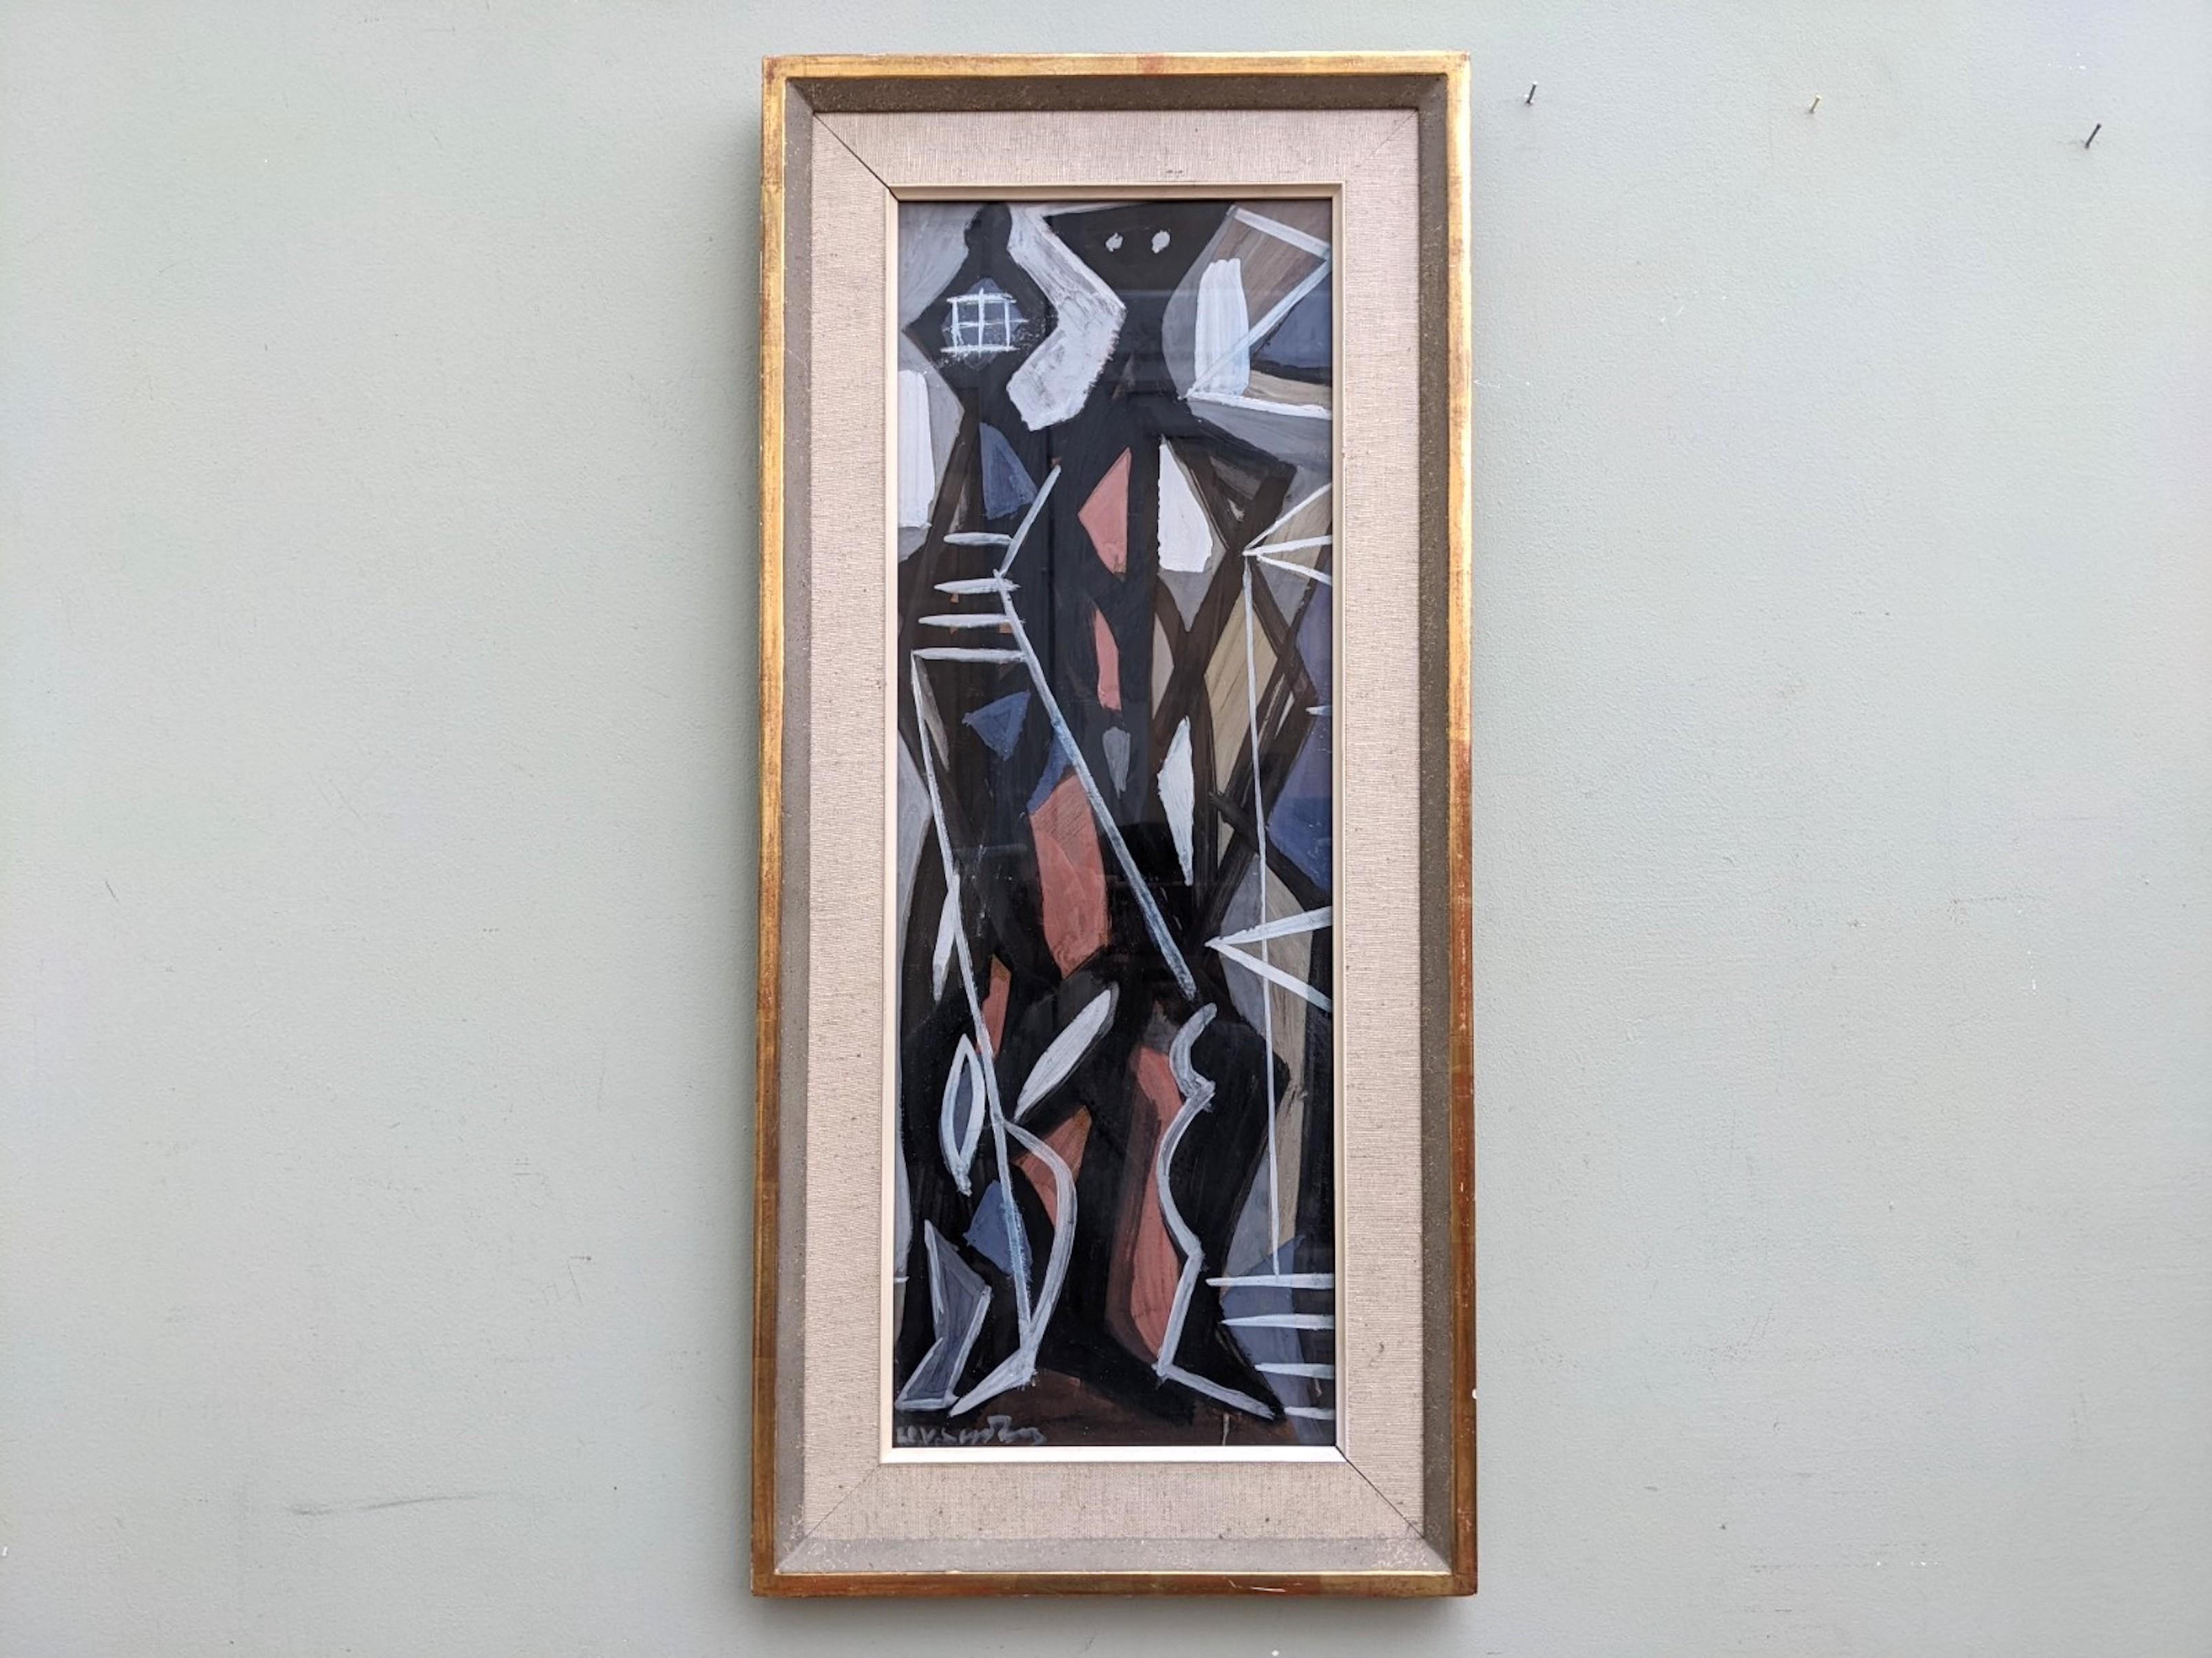 Geometric Figures
Size: 72 x 33 cm (including frame)
Oil & Gouache

A very striking mid century geometric abstract figurative composition, executed in oil and gouache.

The composition depicts what appears to be 2 elongated figures that have been